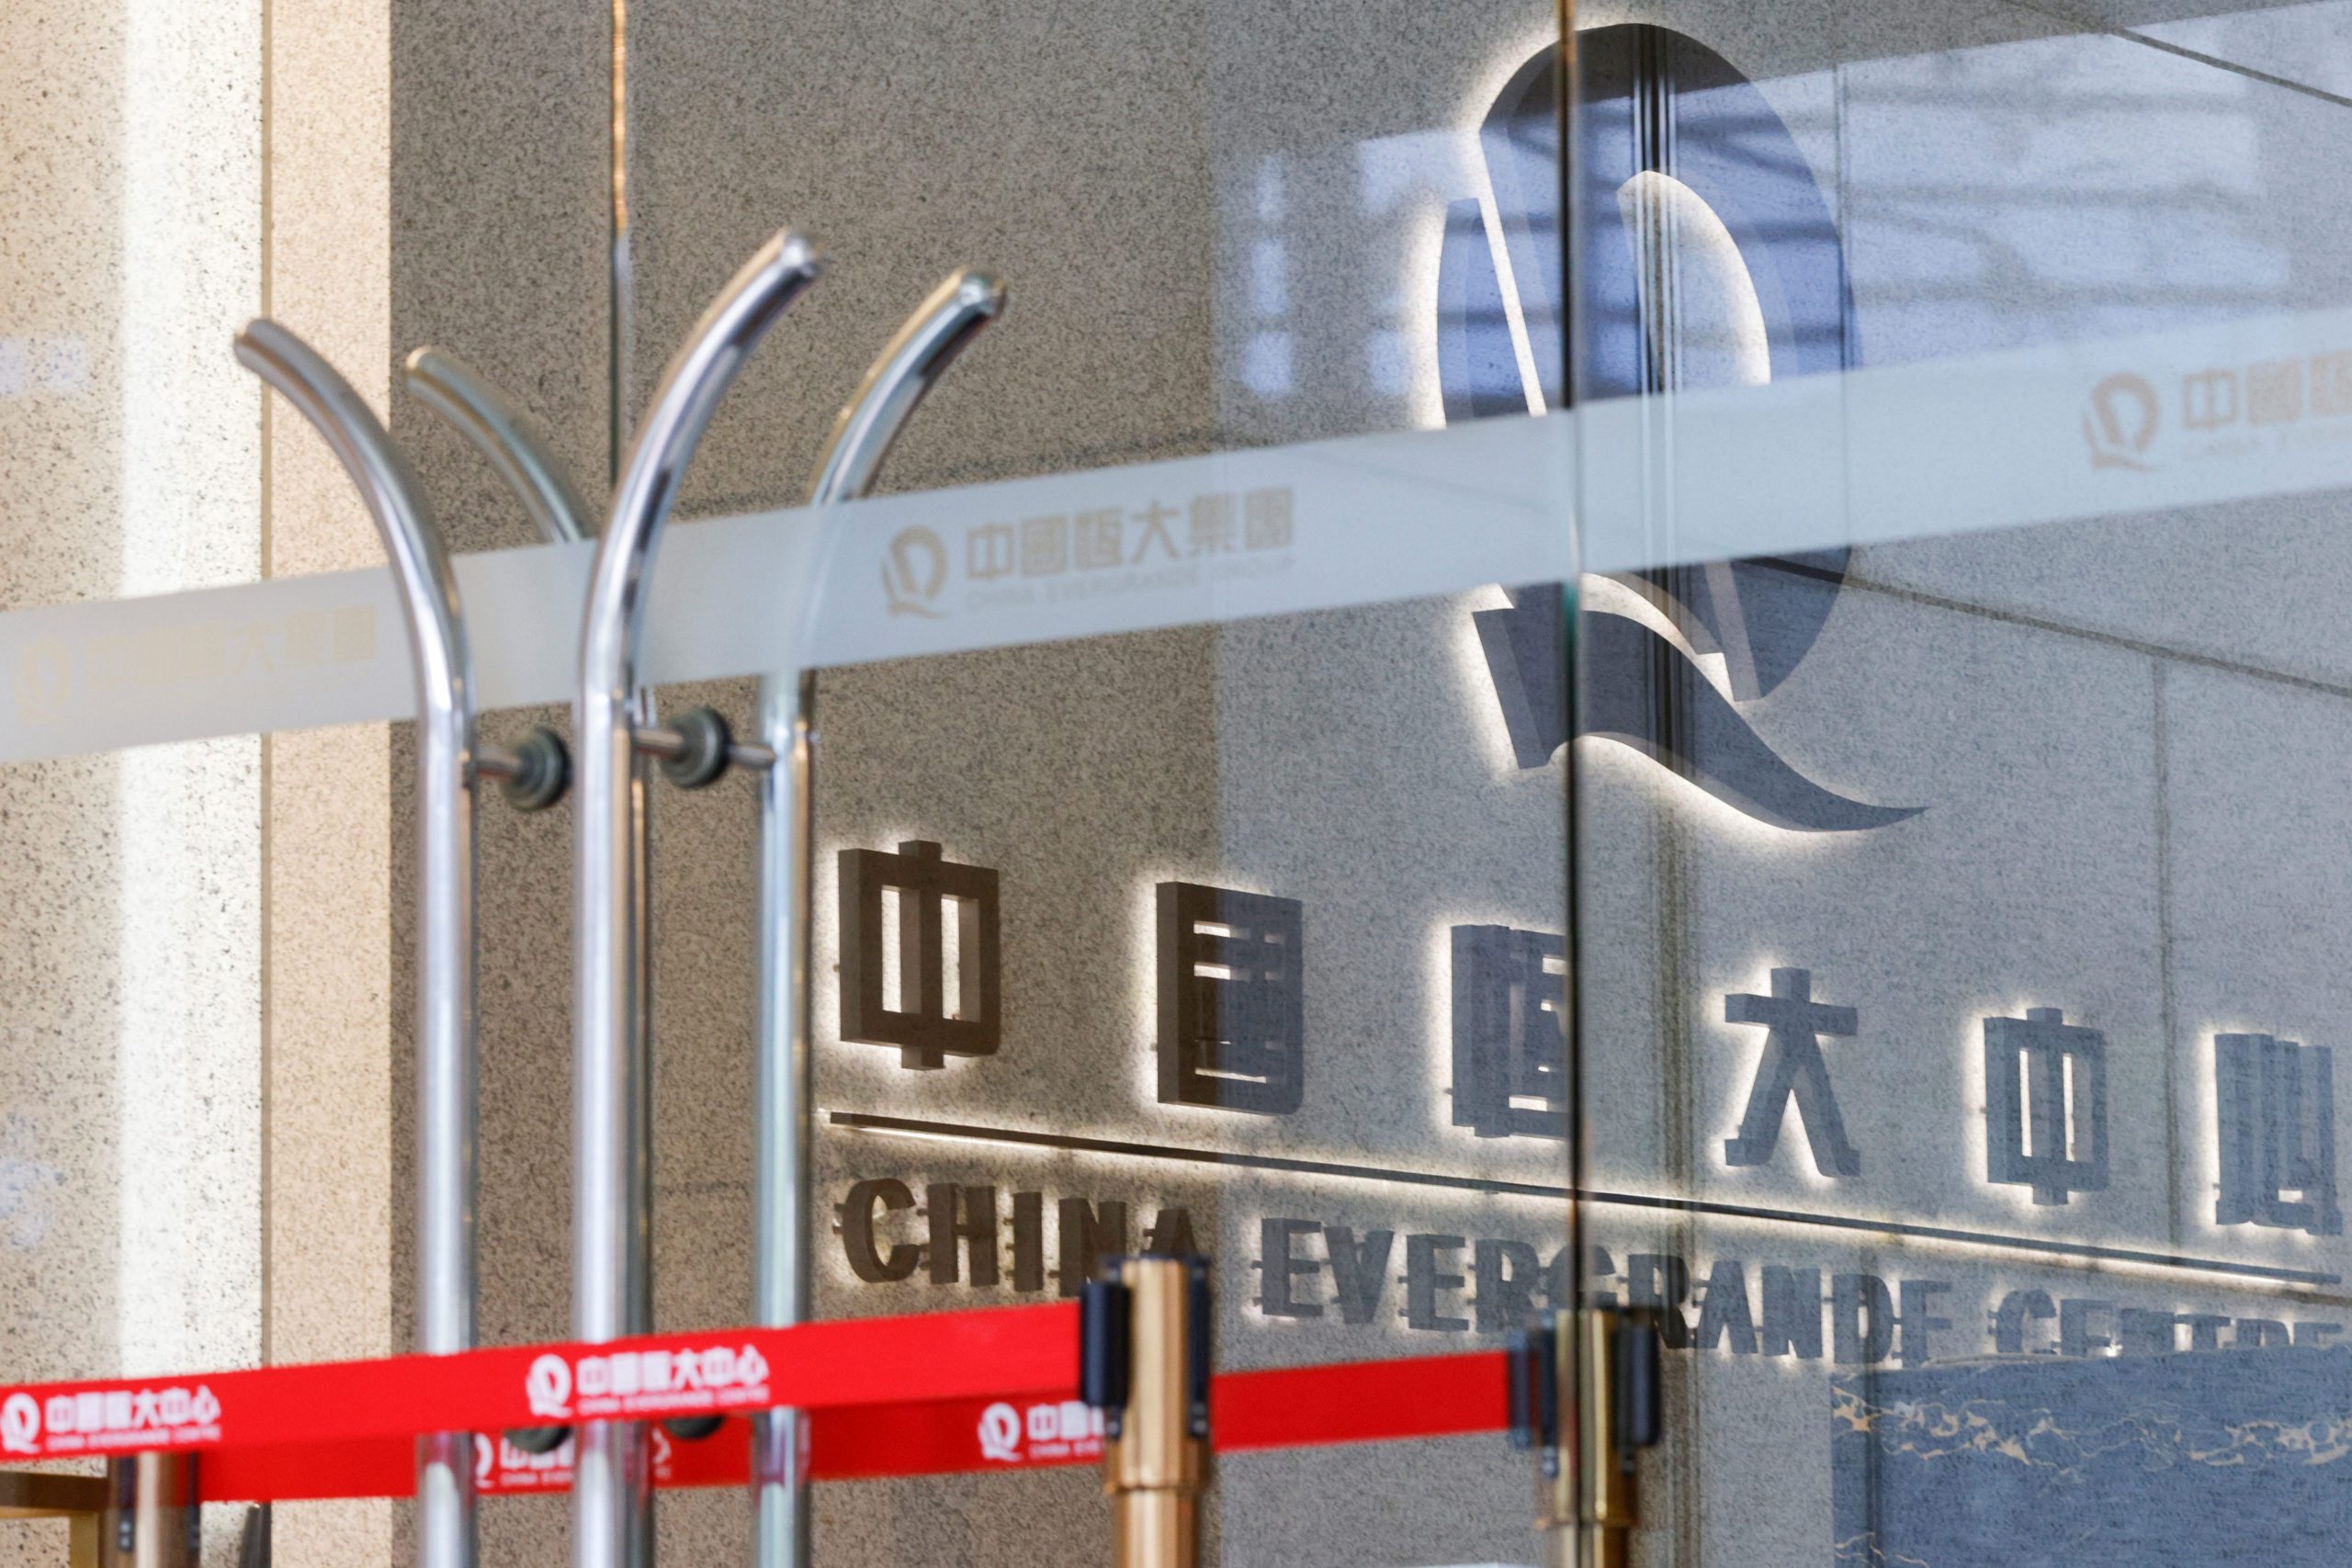 China Evergrande says directors fell 'below standards' in property unit probe